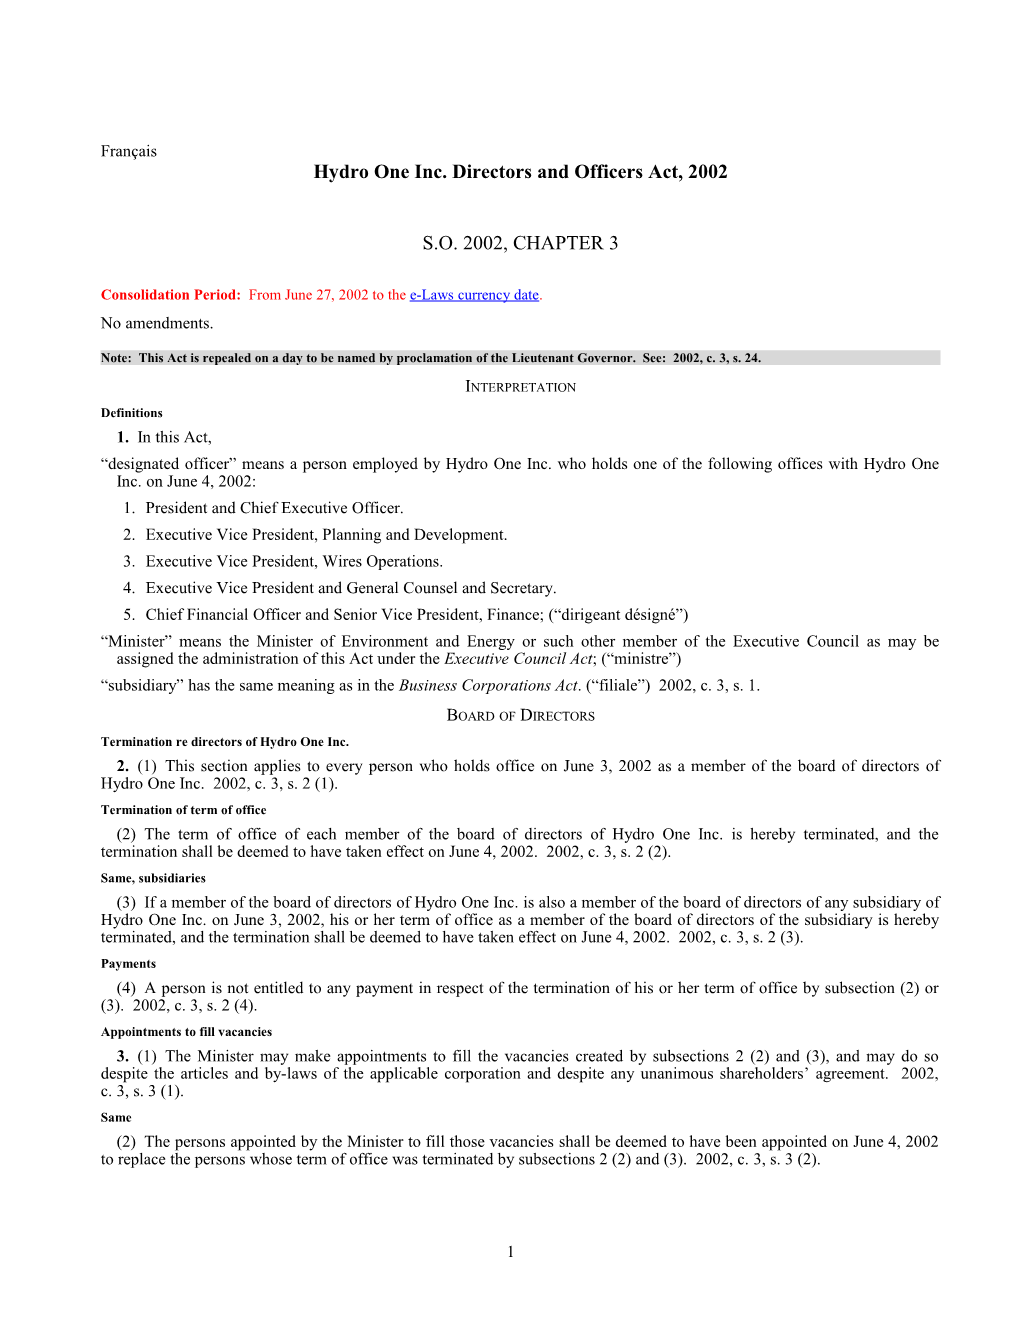 Hydro One Inc. Directors and Officers Act, 2002, S.O. 2002, C. 3